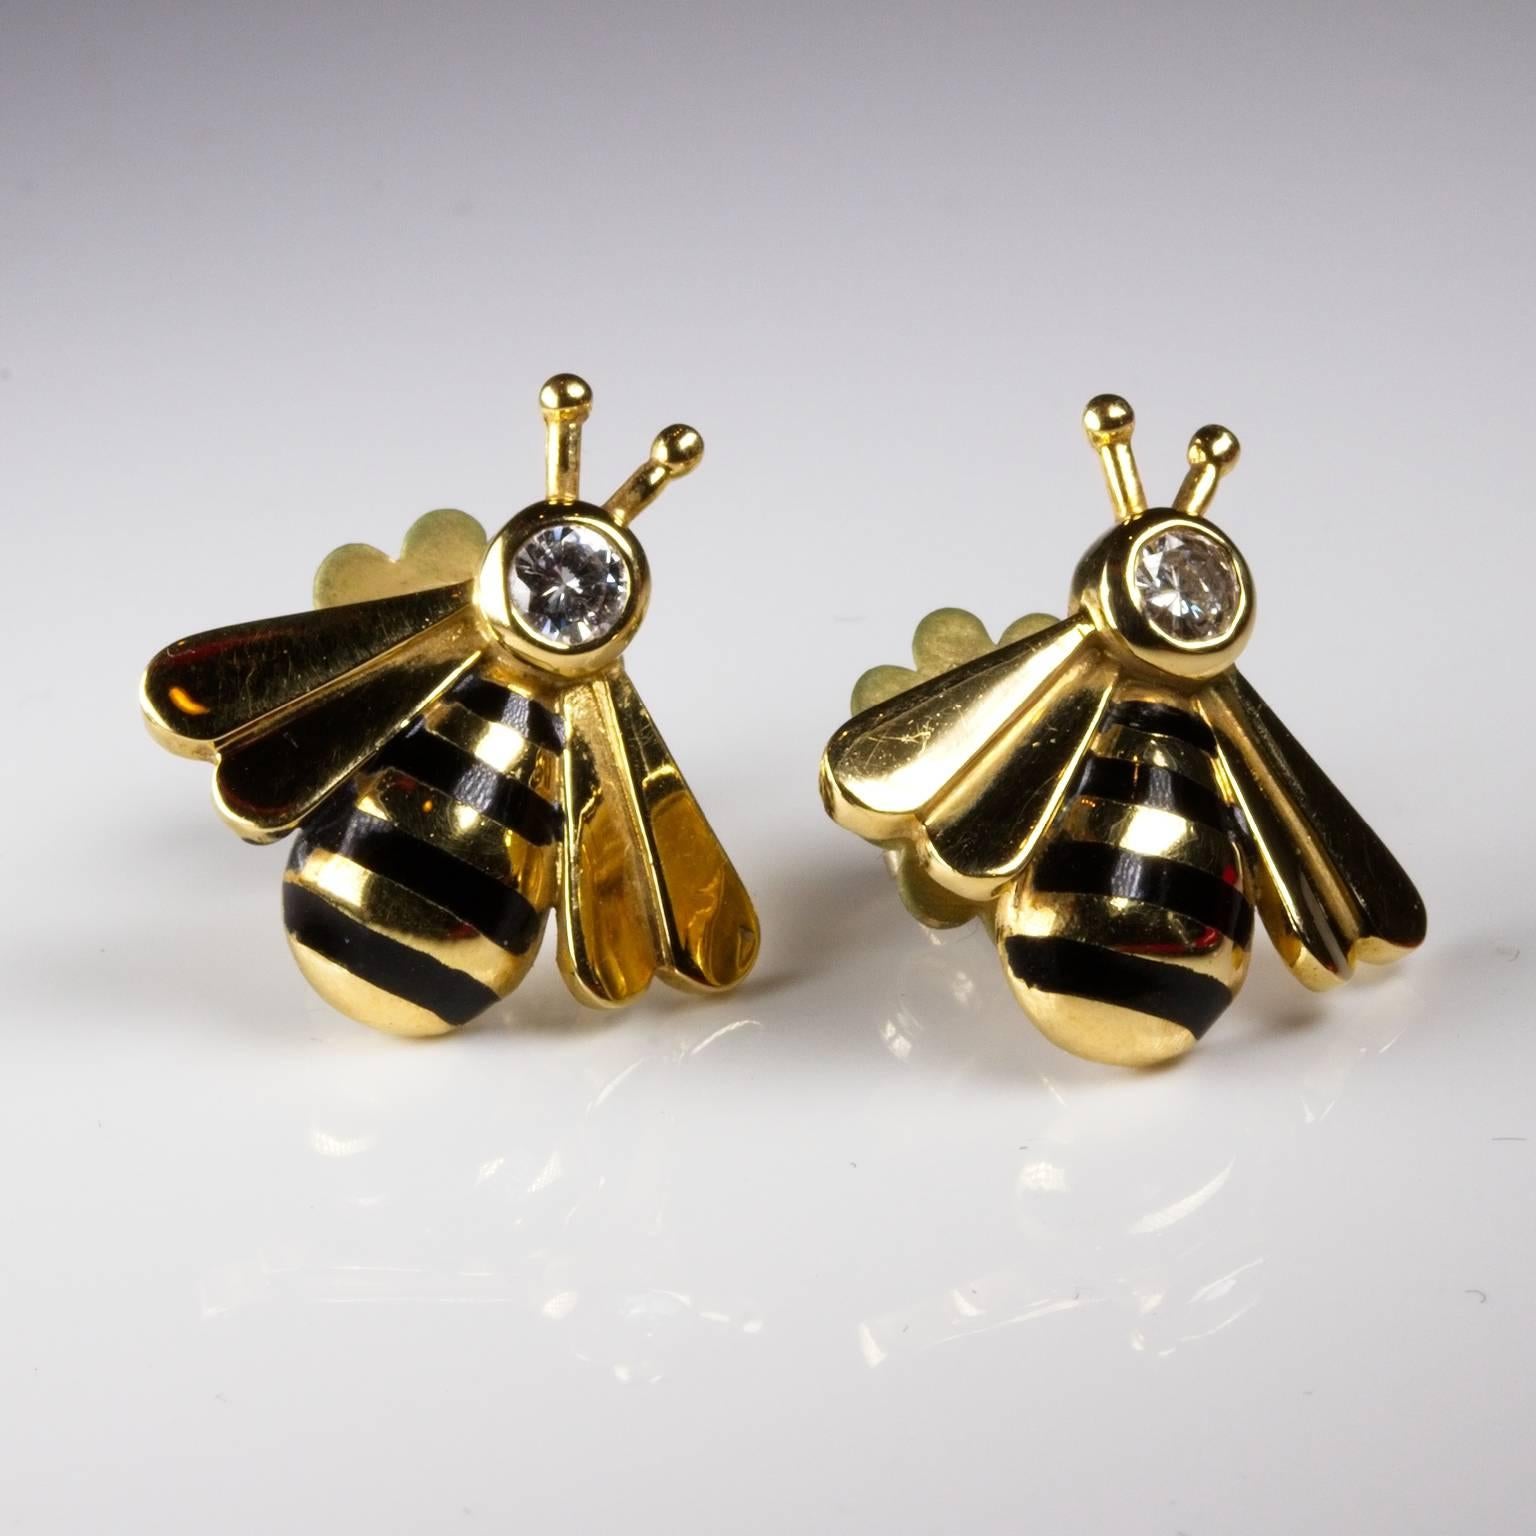 Smart and novel, these diamond stud earrings in the form of bees are set in 18ct gold with black enamel stripes. 9ct gold butterflies. 20mm wide and 17mm long. Previously owned by a European diplomat posted to Sydney, Australia.